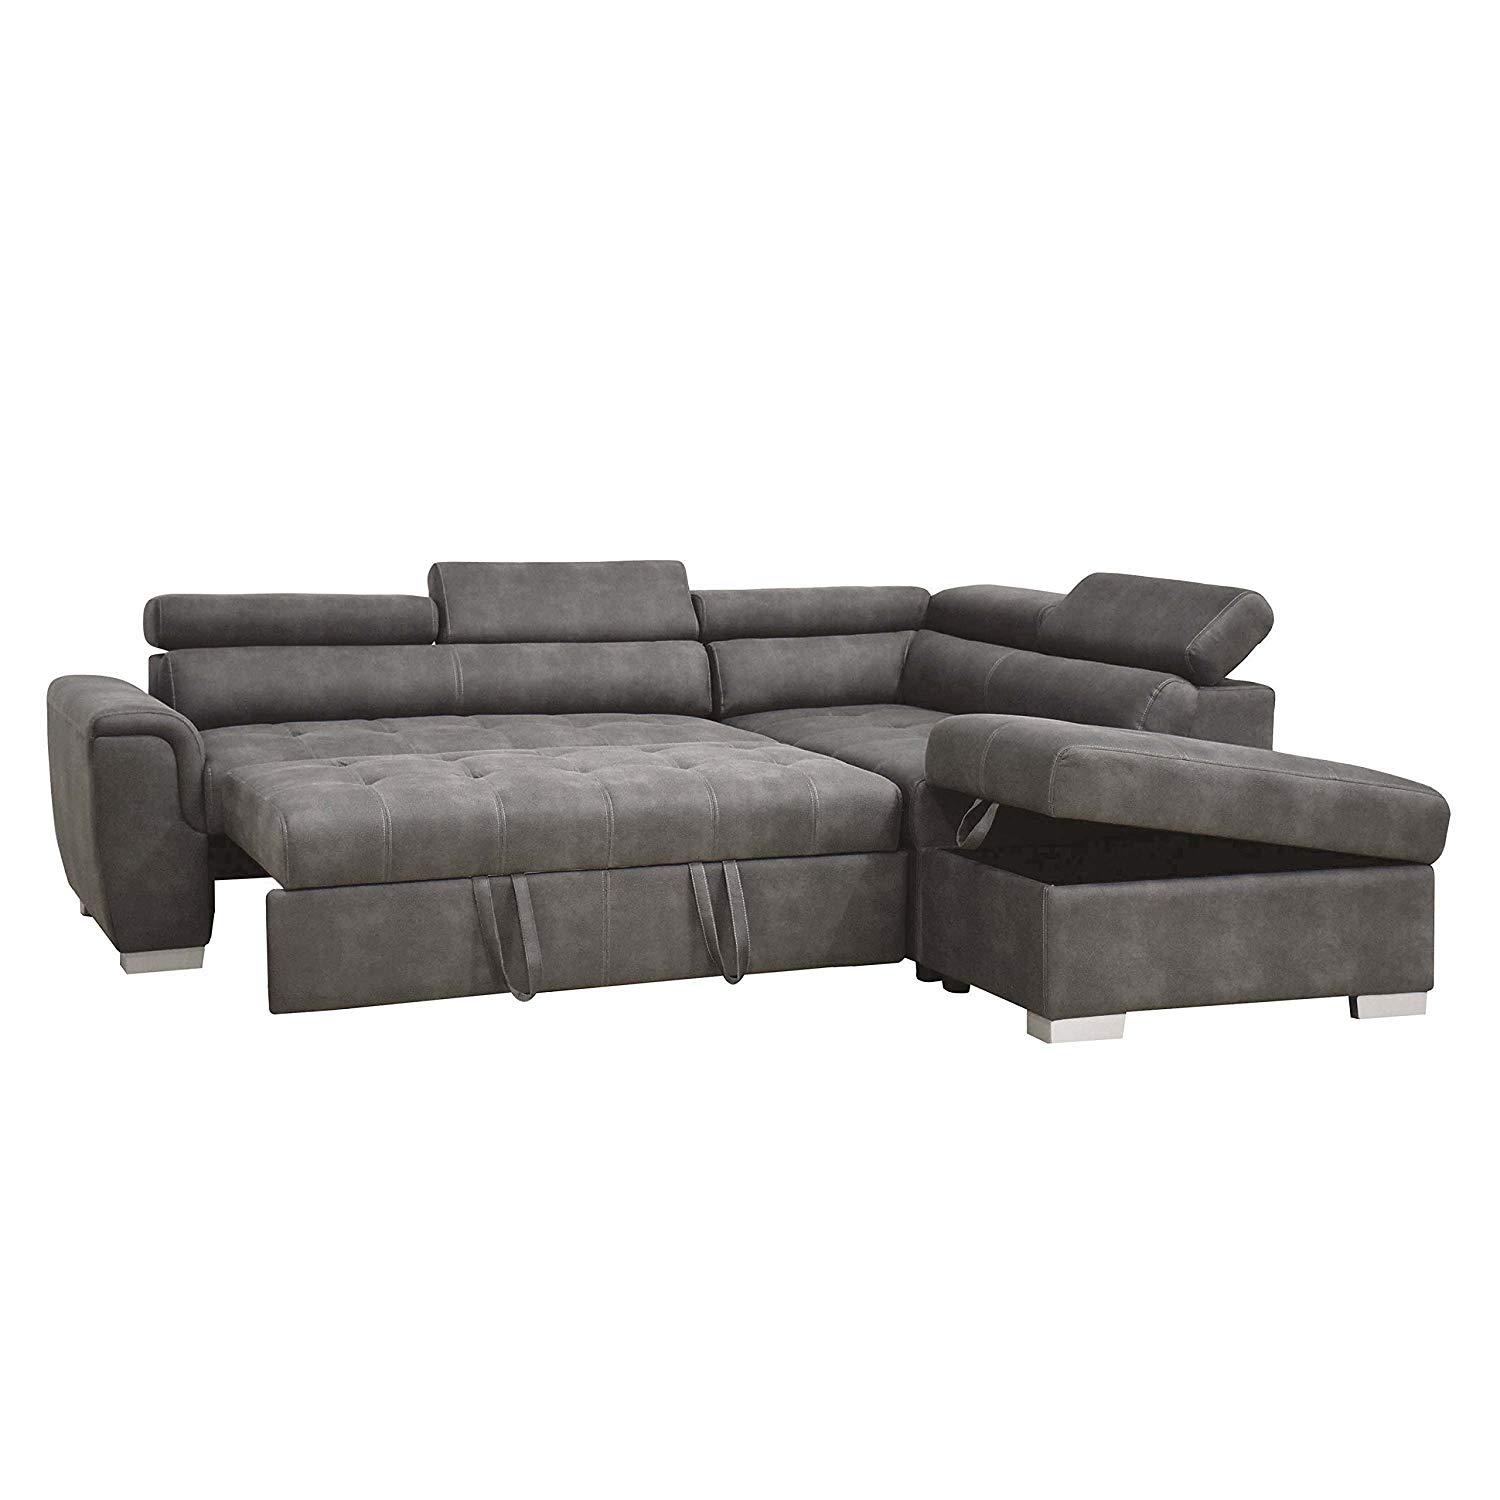 ACME Thelma Sectional Sleeper Sofa and Ottoman in Gray Polished Microfiber - image 2 of 5